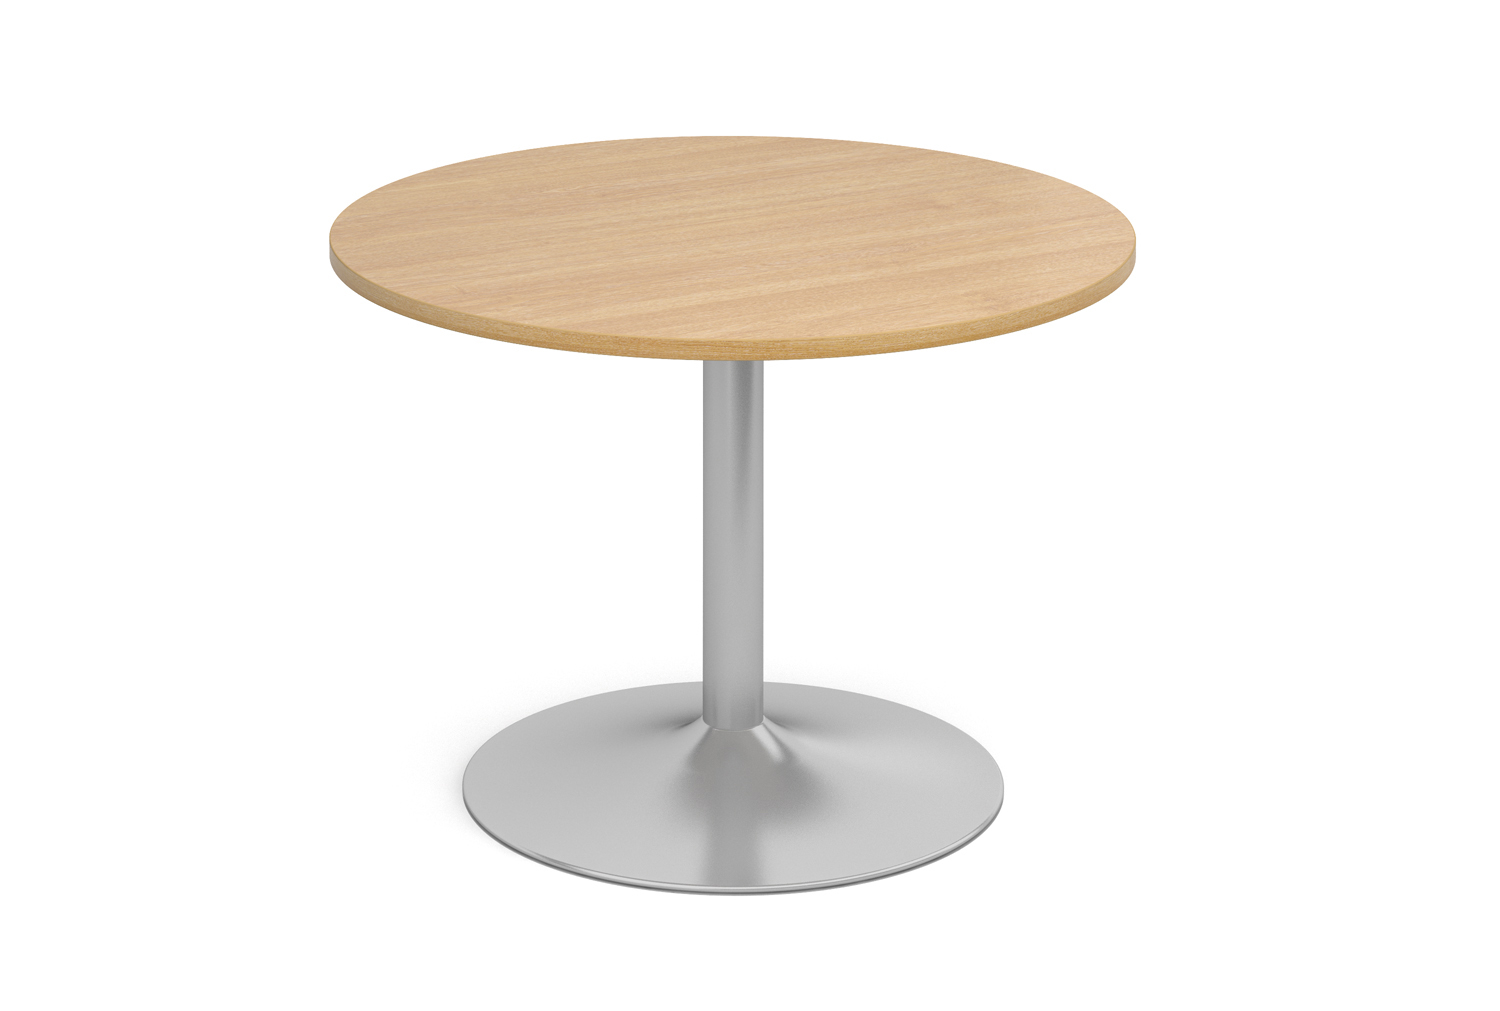 Trumpet Base Circular Boardroom Table, 100diax73h (cm), Silver Frame, Oak, Fully Installed